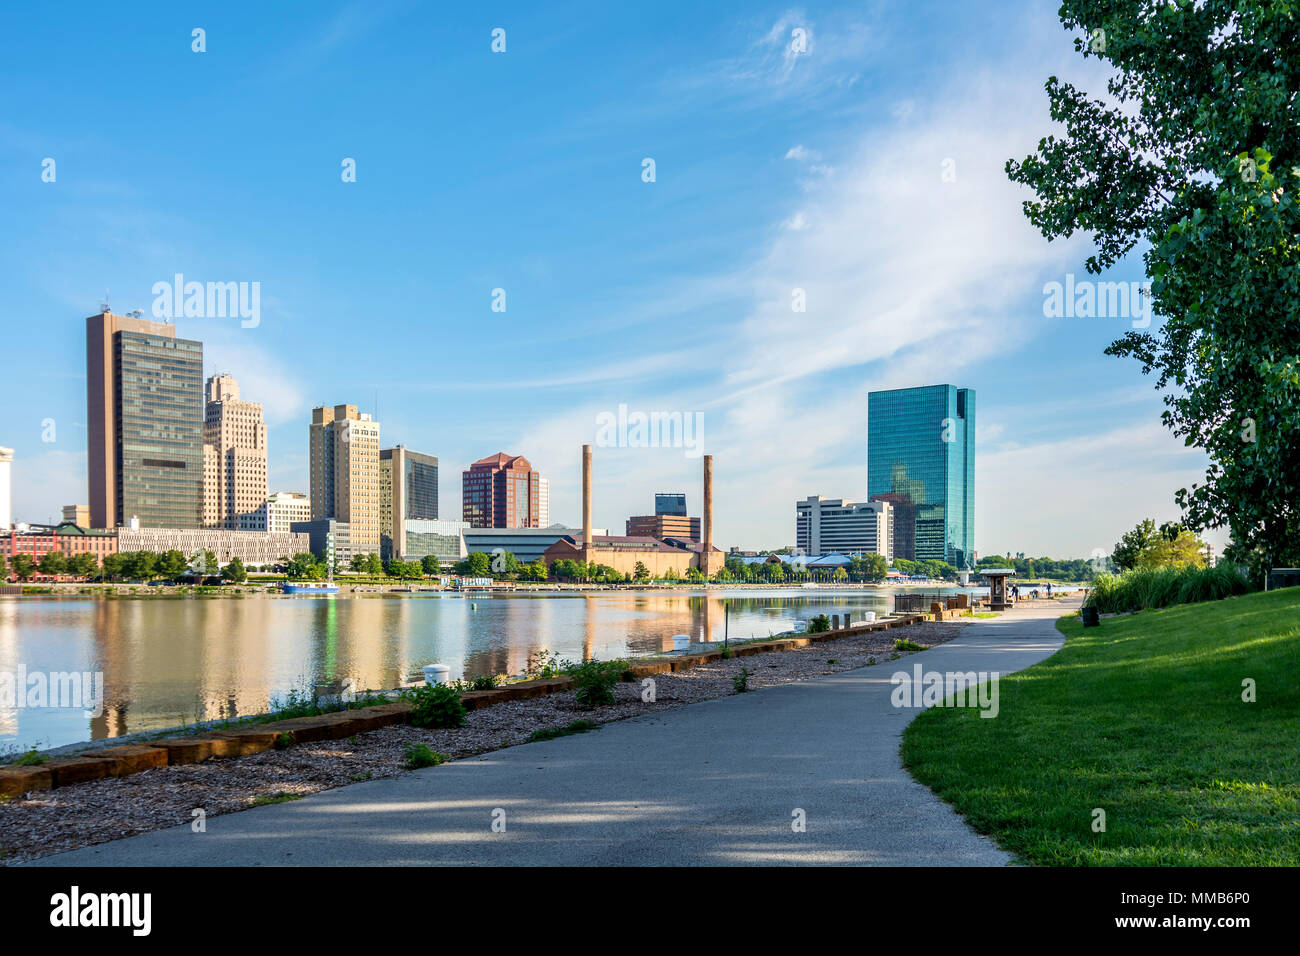 A panoramic view of downtown Toledo Ohio's skyline from across the Maumee River at a popular local park.  A beautiful blue sky with white clouds. Stock Photo